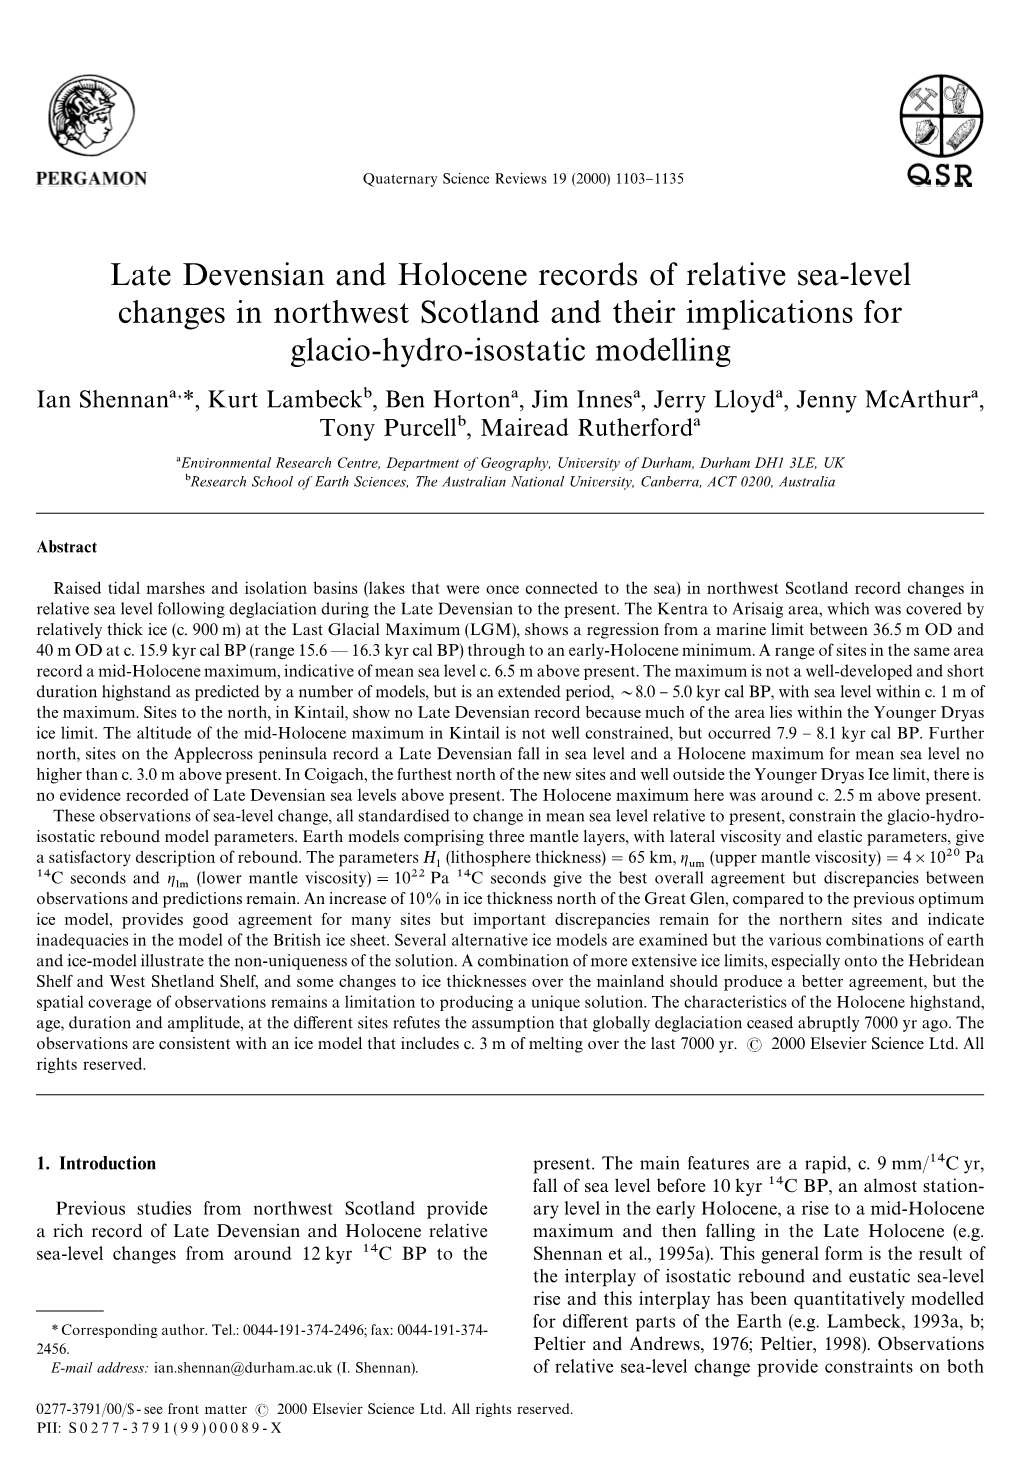 Late Devensian and Holocene Records of Relative Sea-Level